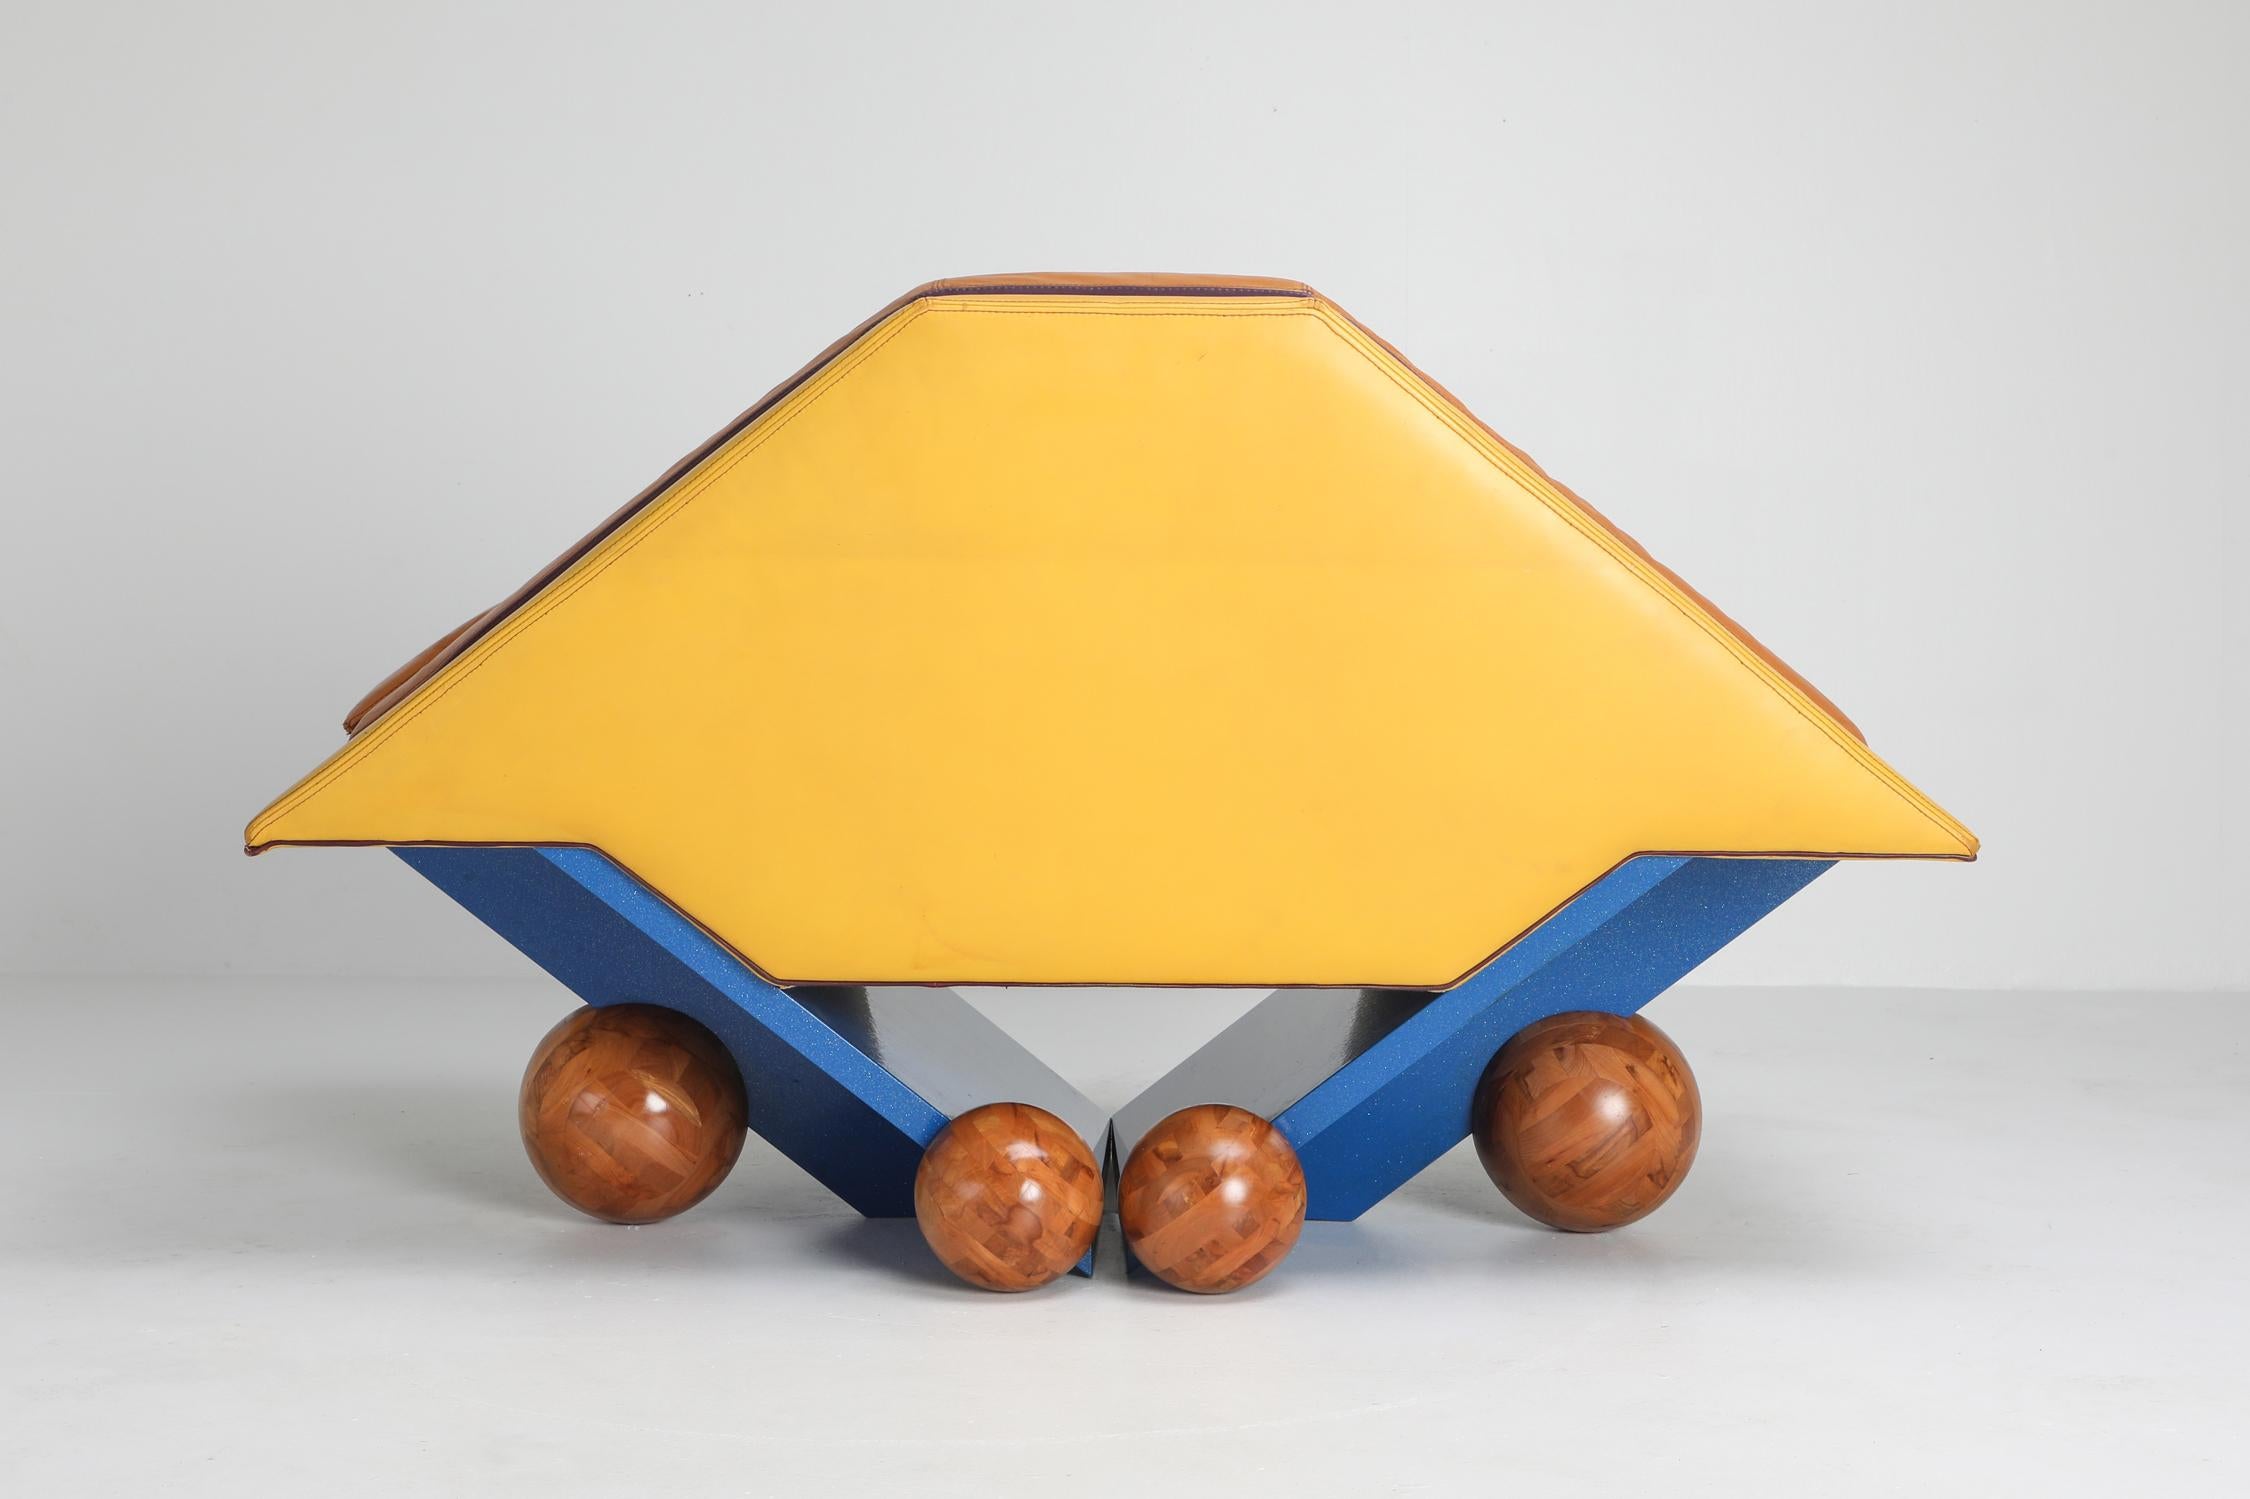 Postmodern diamond-shaped leather chair, Rosenthal, Germany, 1980s

Unusual club chair in a variety of colors.
Leather seating, wooden frame, and wooden spherical balls serve as feet.
Memphis style piece typical from the 1980s.